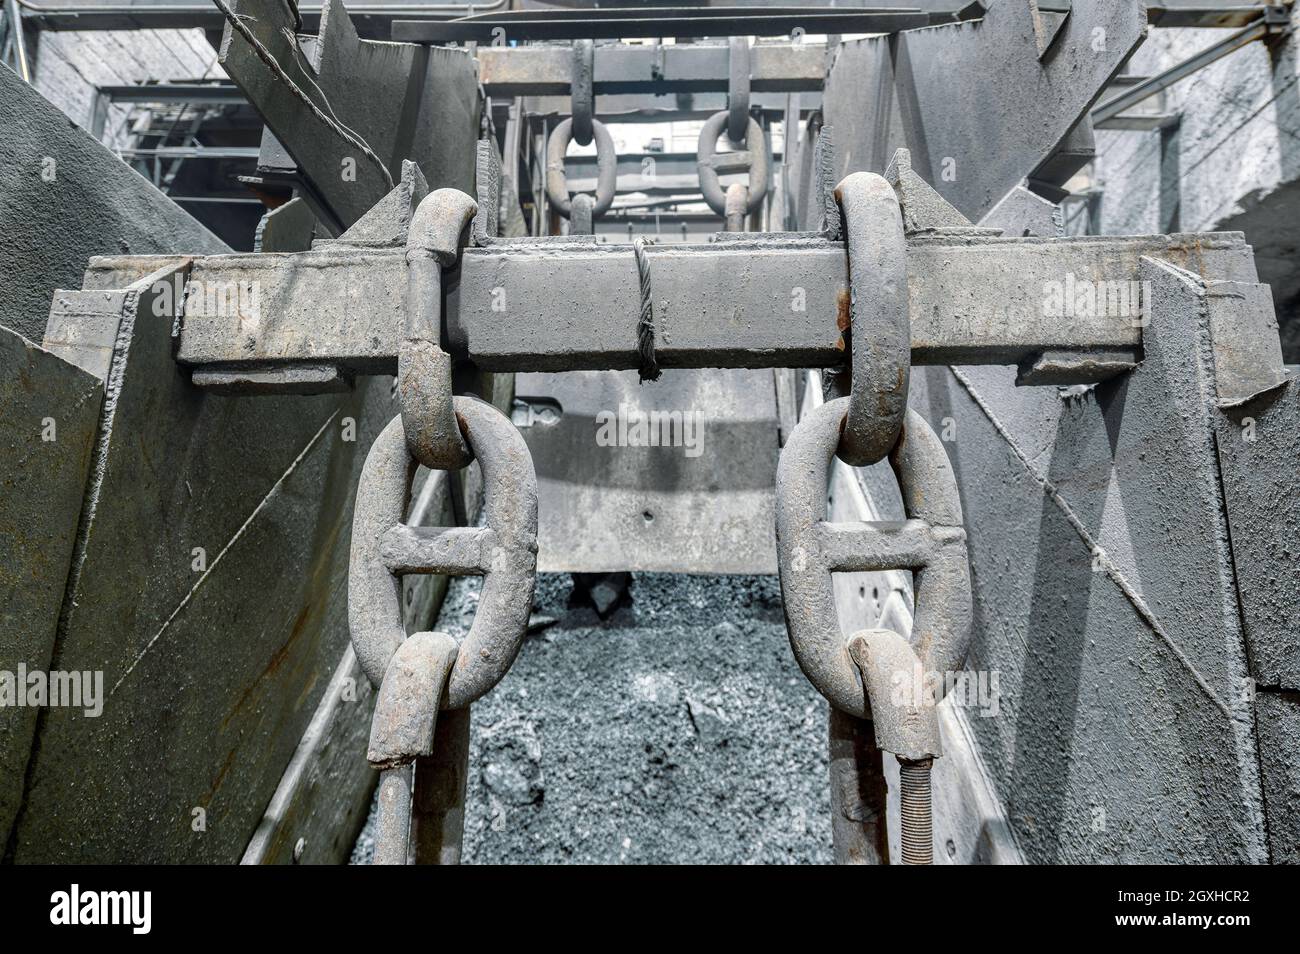 Metal ore vibrating conveyor, heavy duty steel plates and large chains Stock Photo